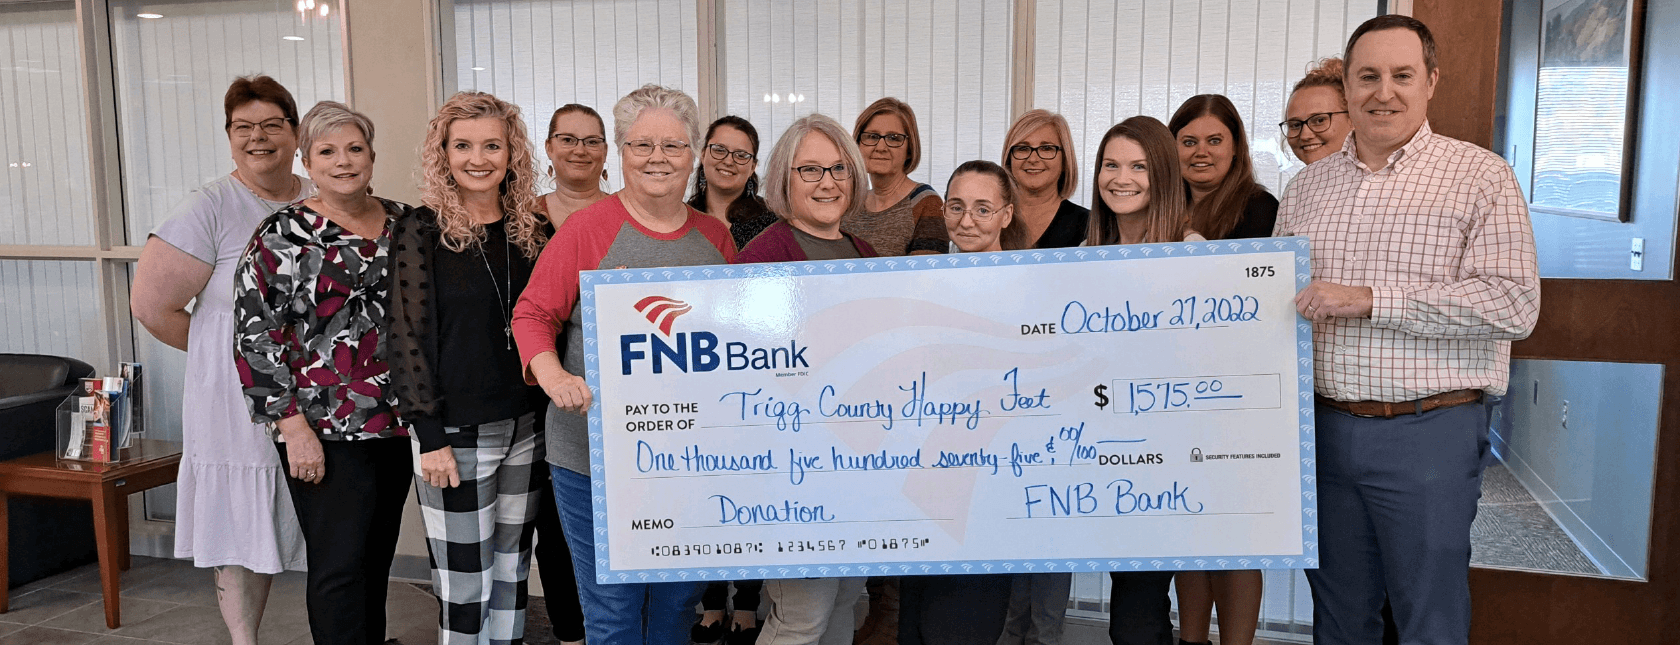 FNB Presents Check for $1,575 to Trigg County Happy Feet